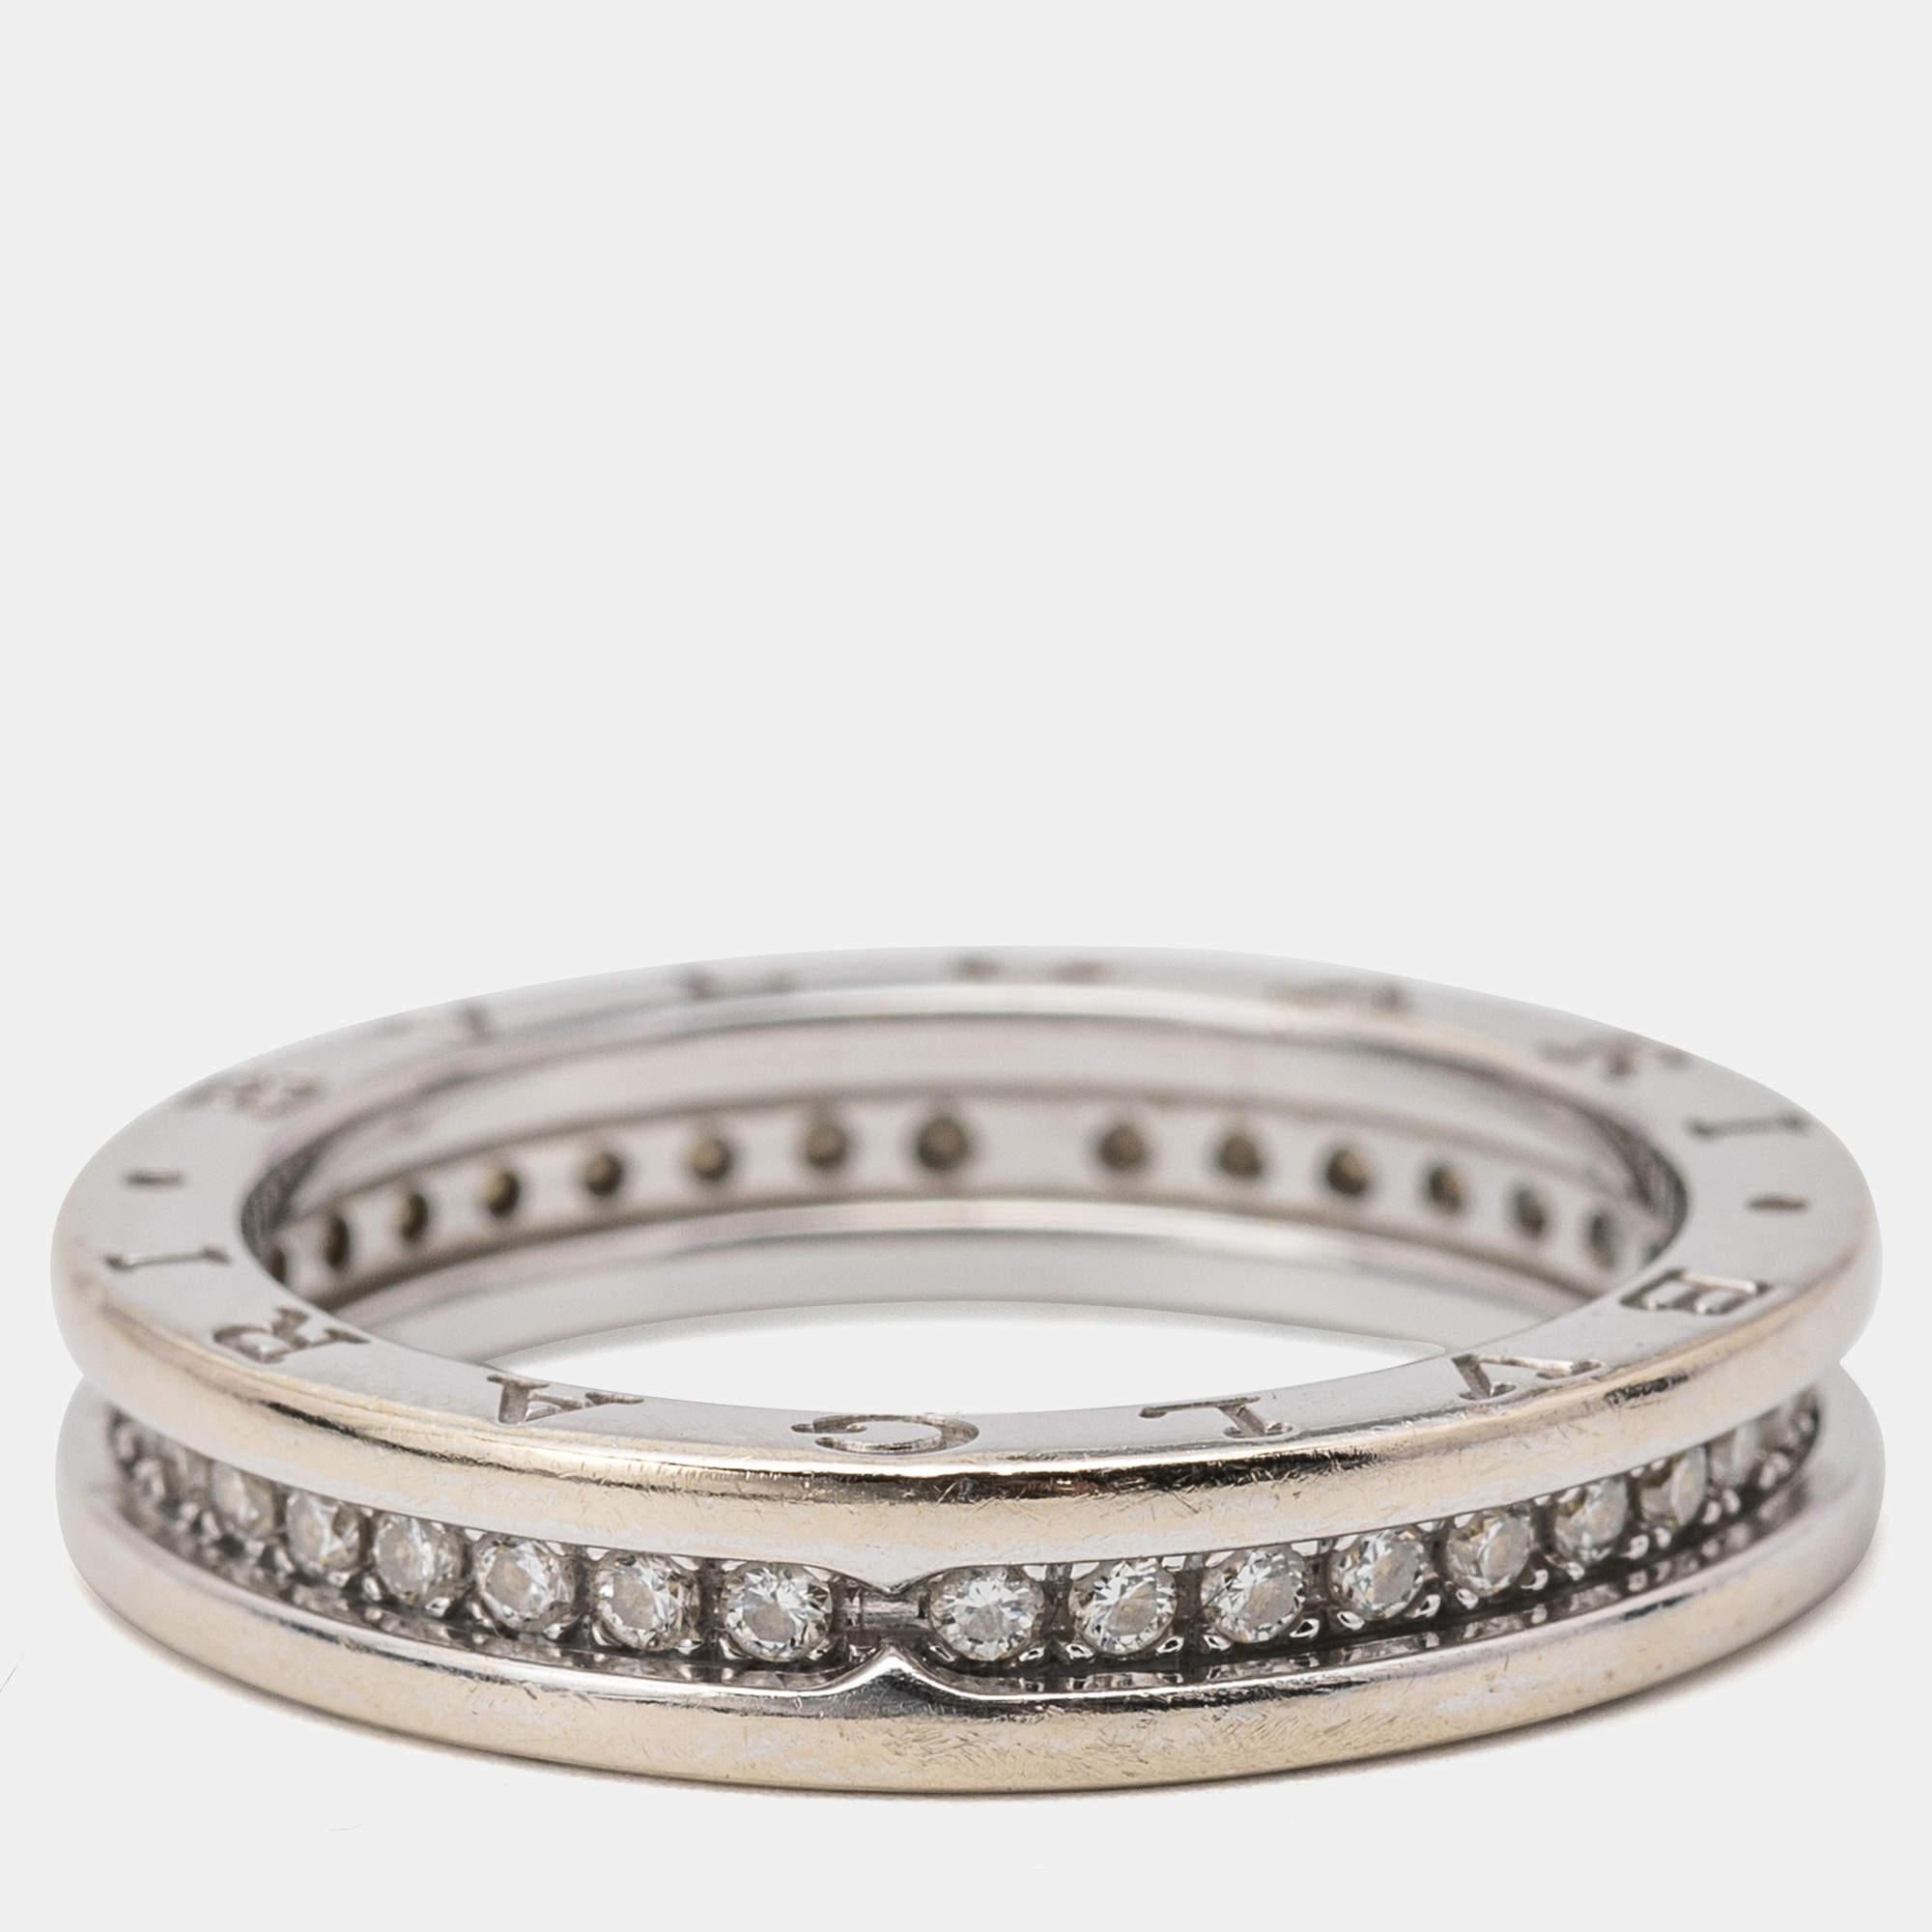 Unique and modern, this charming B.Zero1 band is from one of Bvlgari's iconic collections. Beautifully crafted from 18k white gold, the ring is added with diamonds. Inspired by the Colosseum, this ring merges exceptional creative vision and